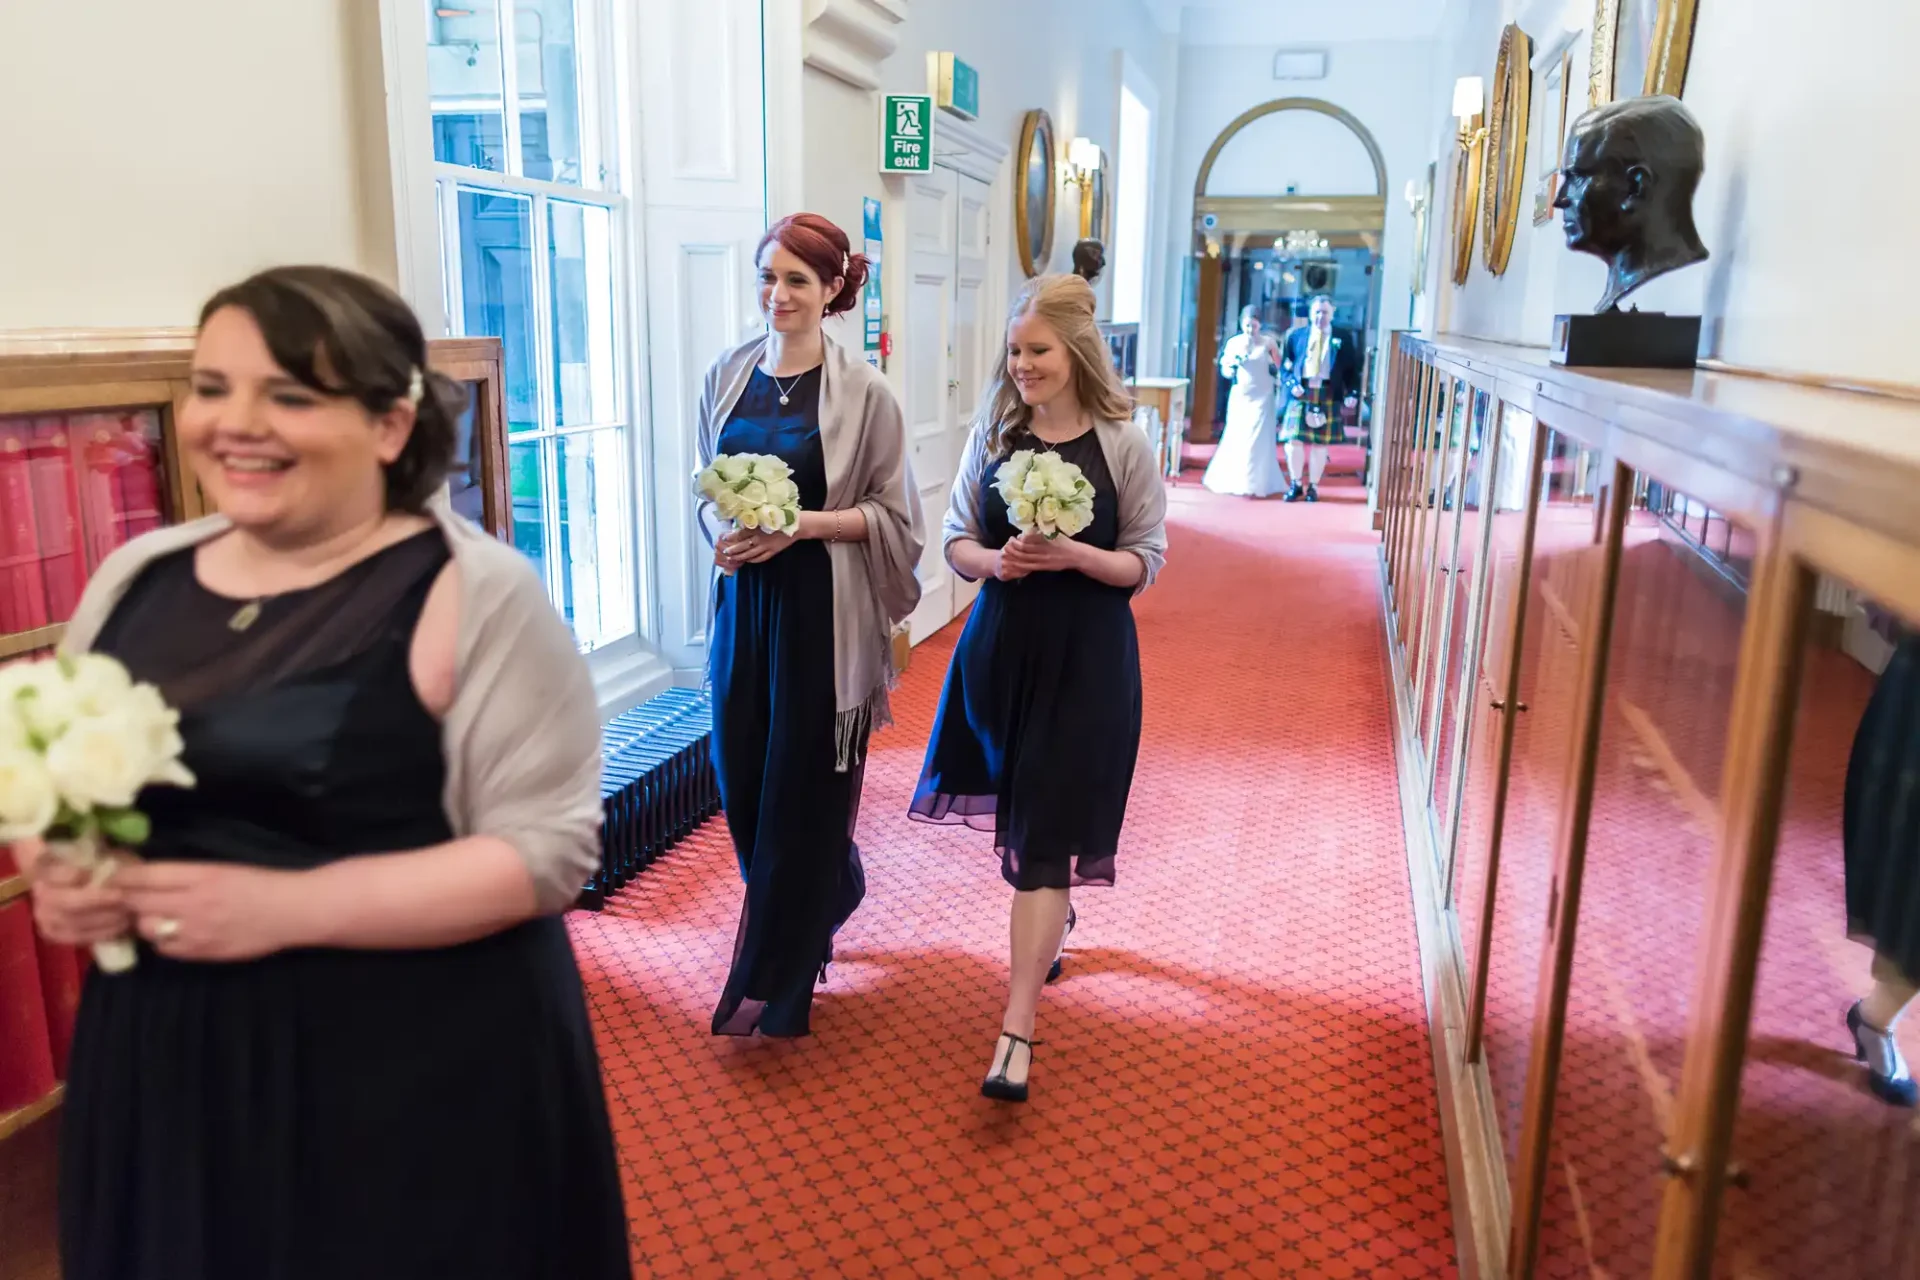 Three bridesmaids walking down a hallway, holding bouquets, and smiling during a wedding ceremony.